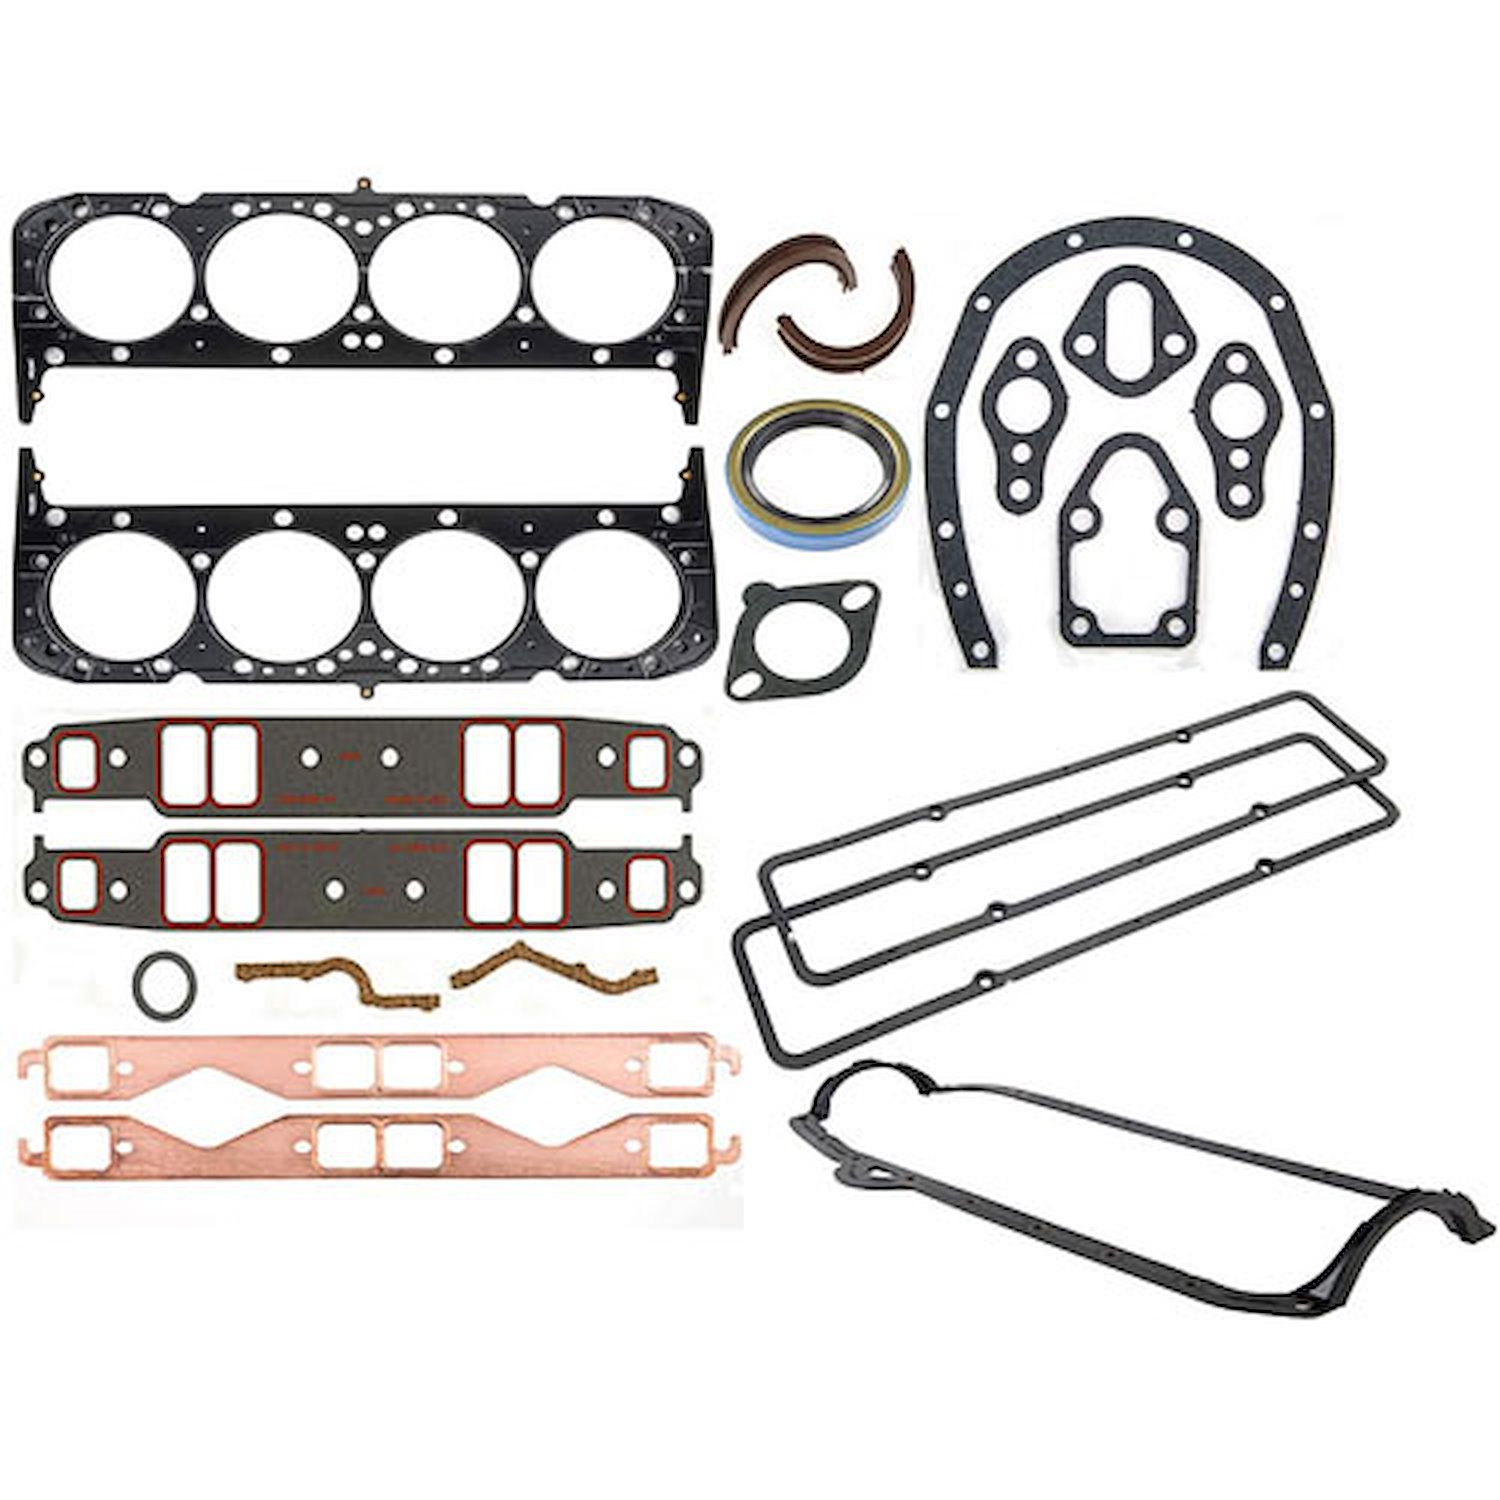 Gasket Kit for 1967-1980 Small Block Chevy 265-350